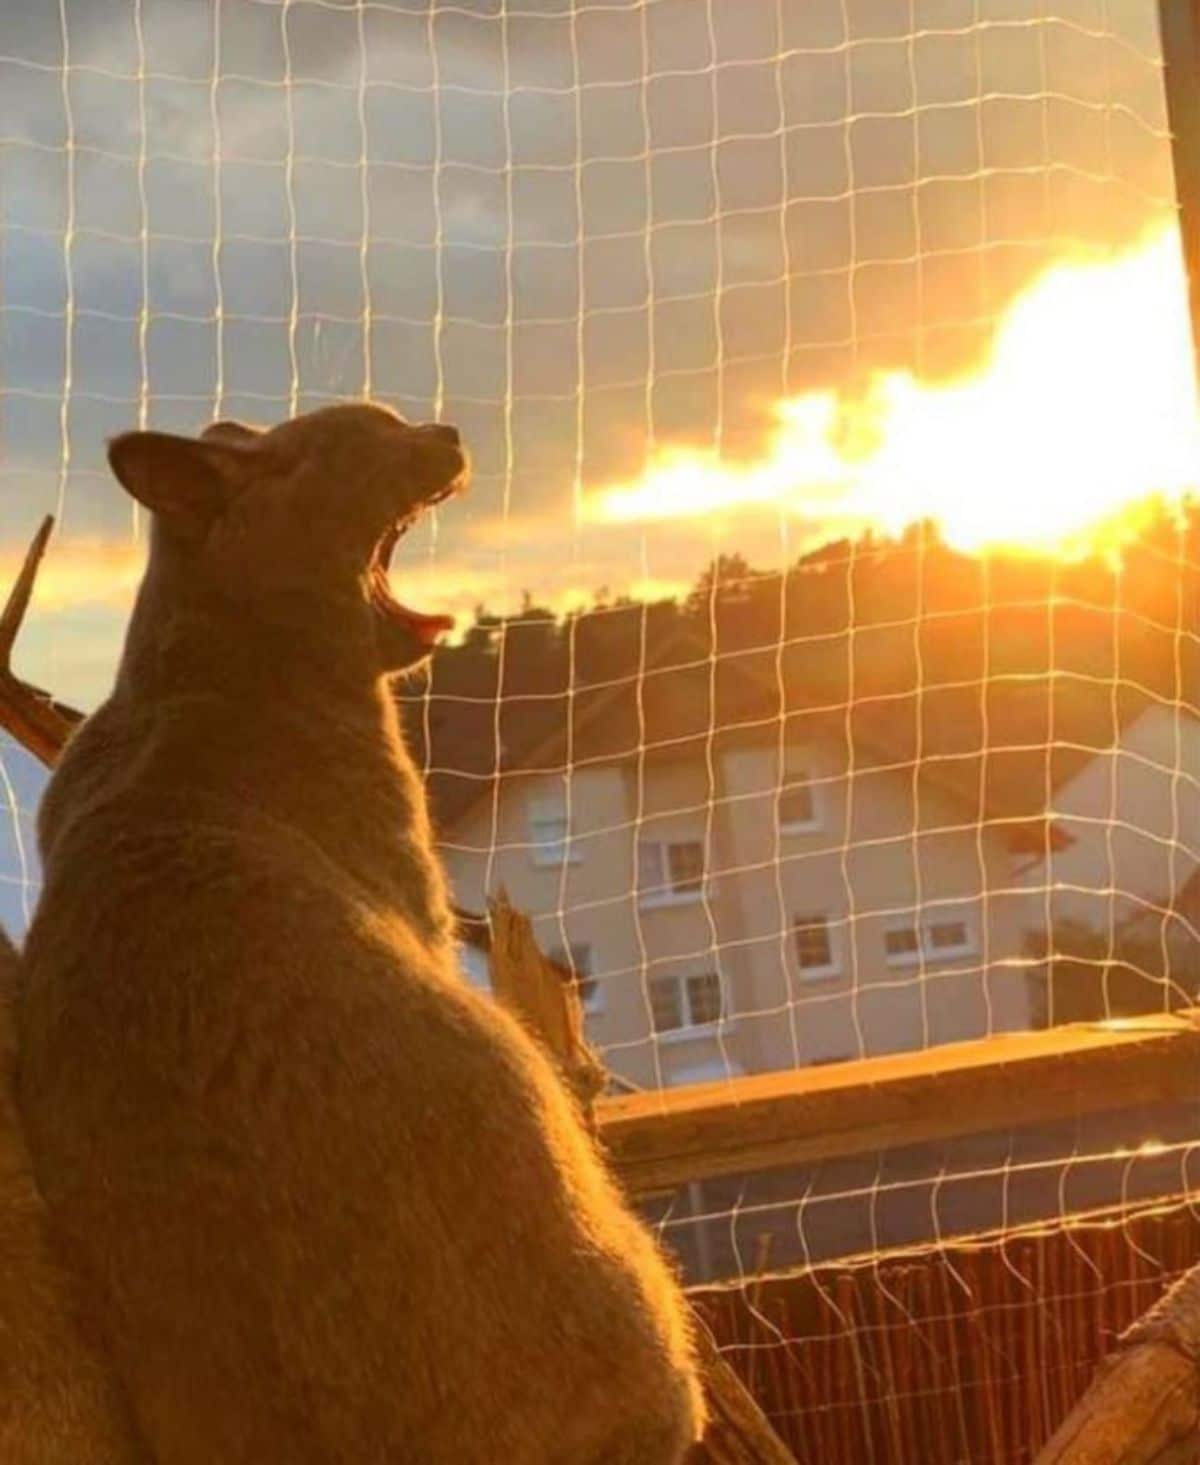 orange cat with its mouth wide open next to a net and bright white and orange clouds in the sunset behind the cat looking like flames coming out of its mouth